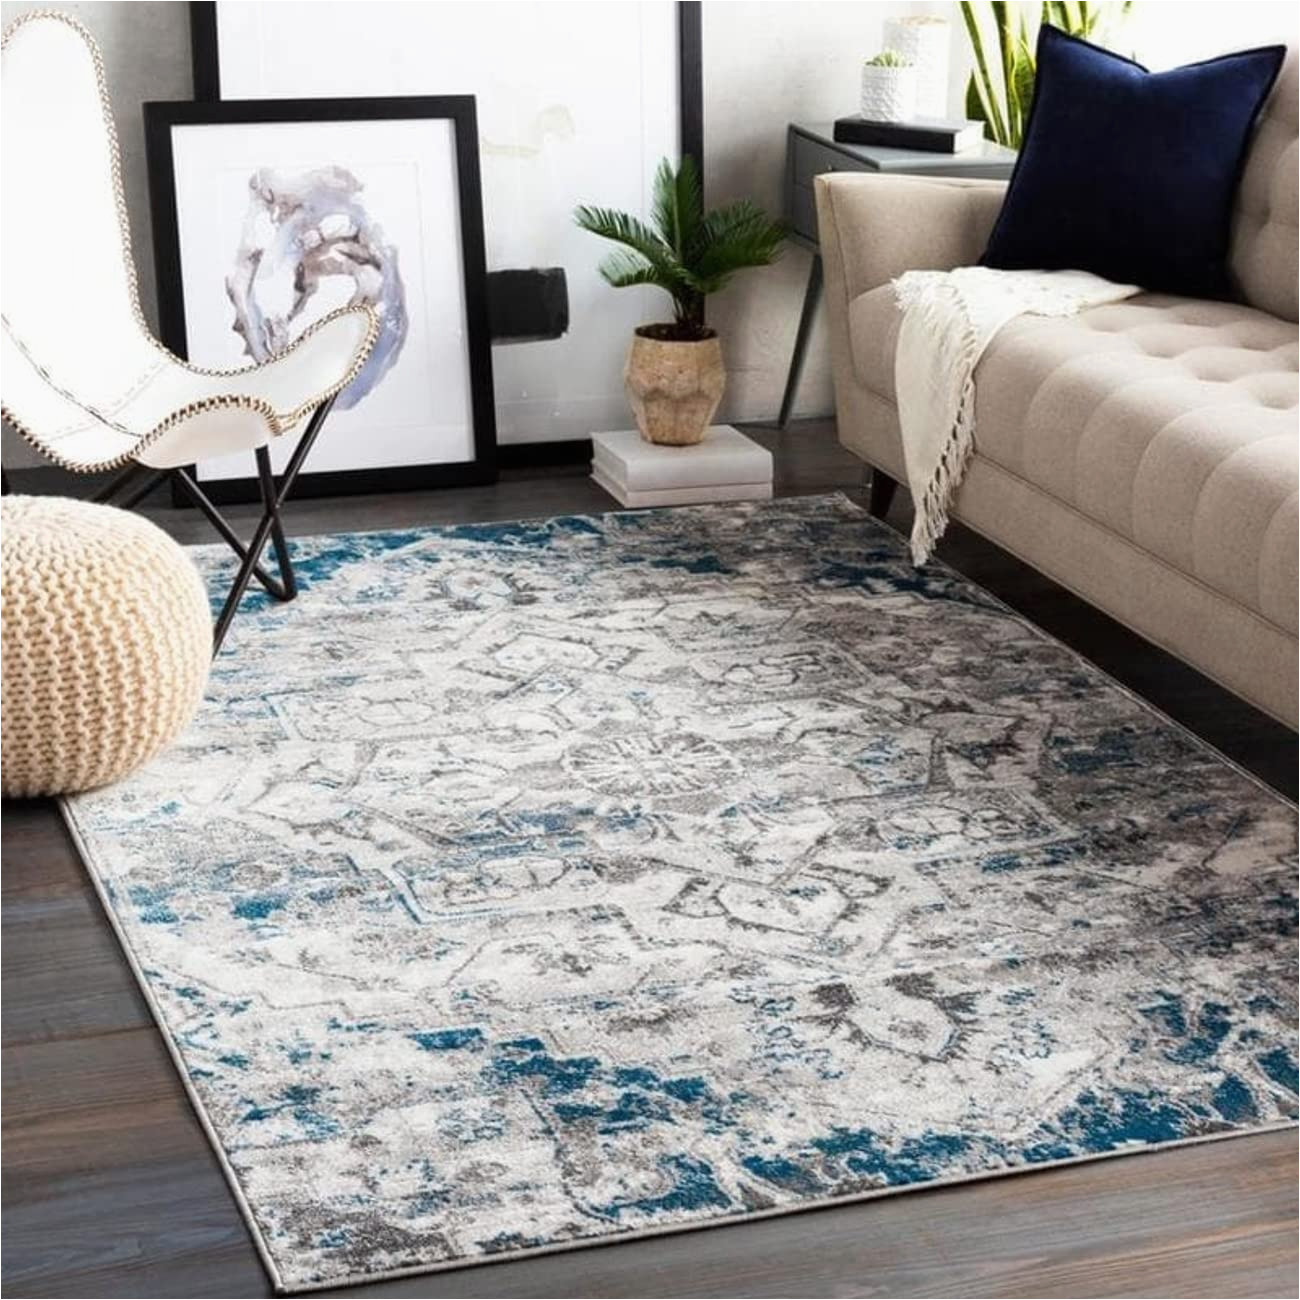 Blue Square area Rugs Mark&day area Rugs, 5×5 Angelo Transitional Ivory/blue Square area Rug, Beige / White Carpet for Living Room, Bedroom or Kitchen (5’3″ Square)